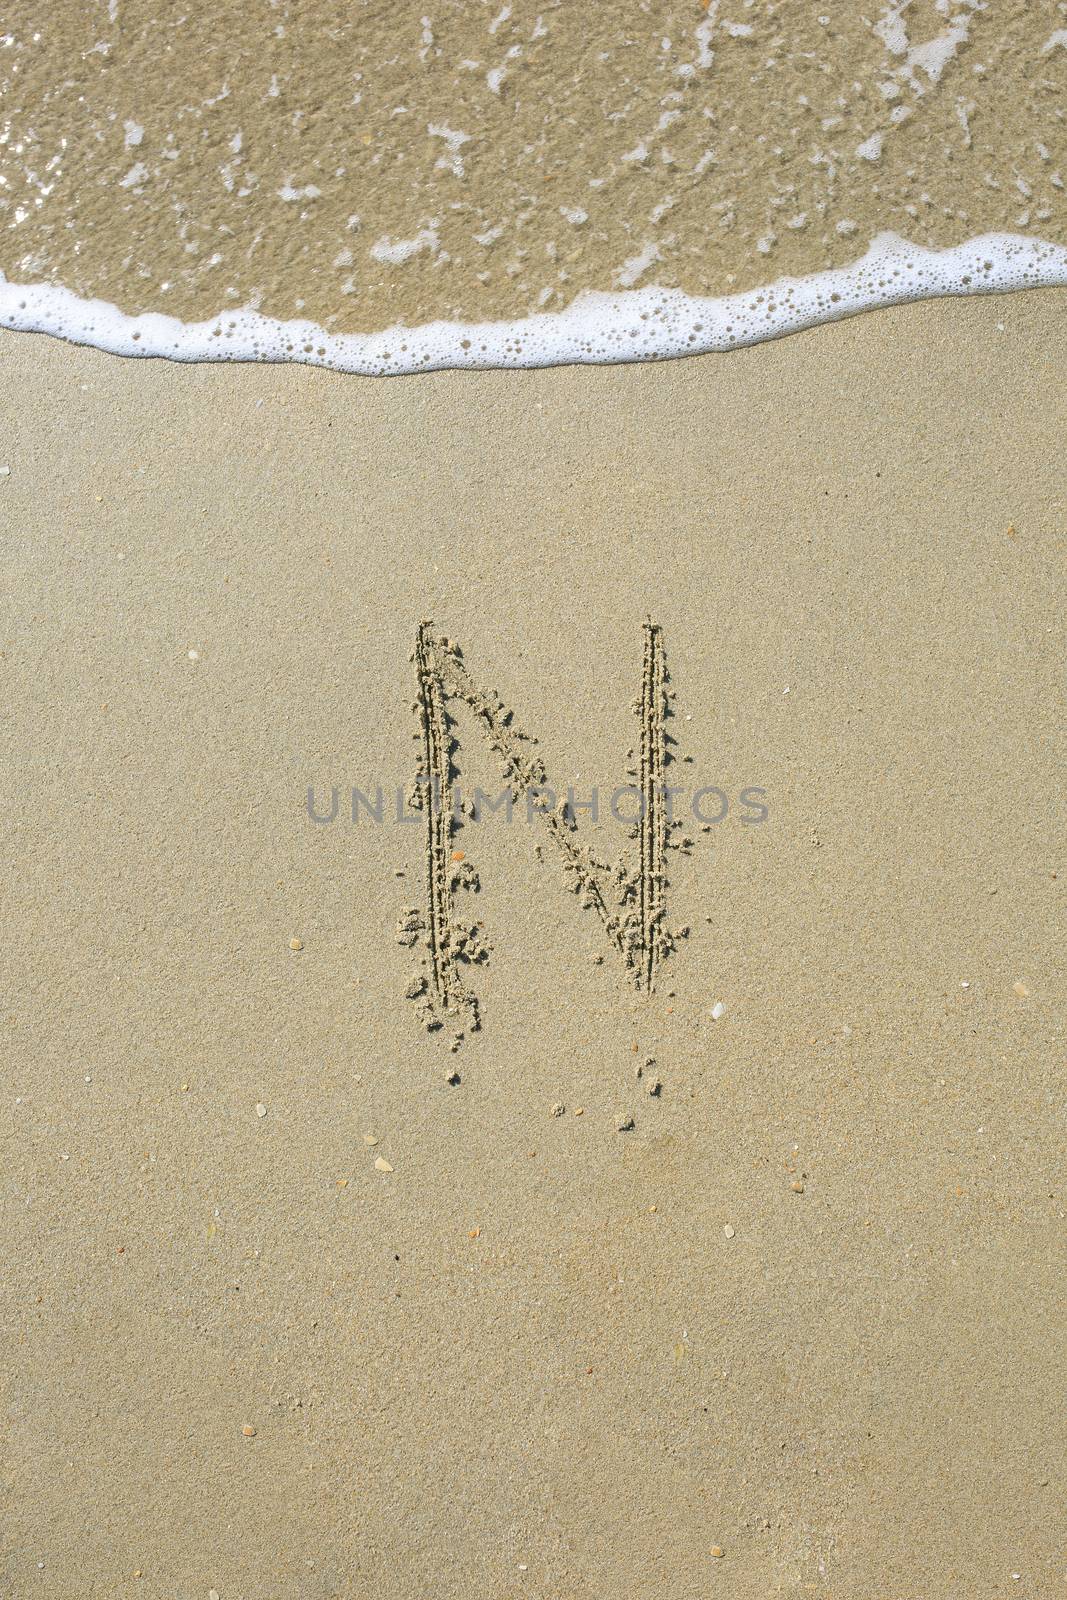 Letter drawn on the sand beach by nachrc2001